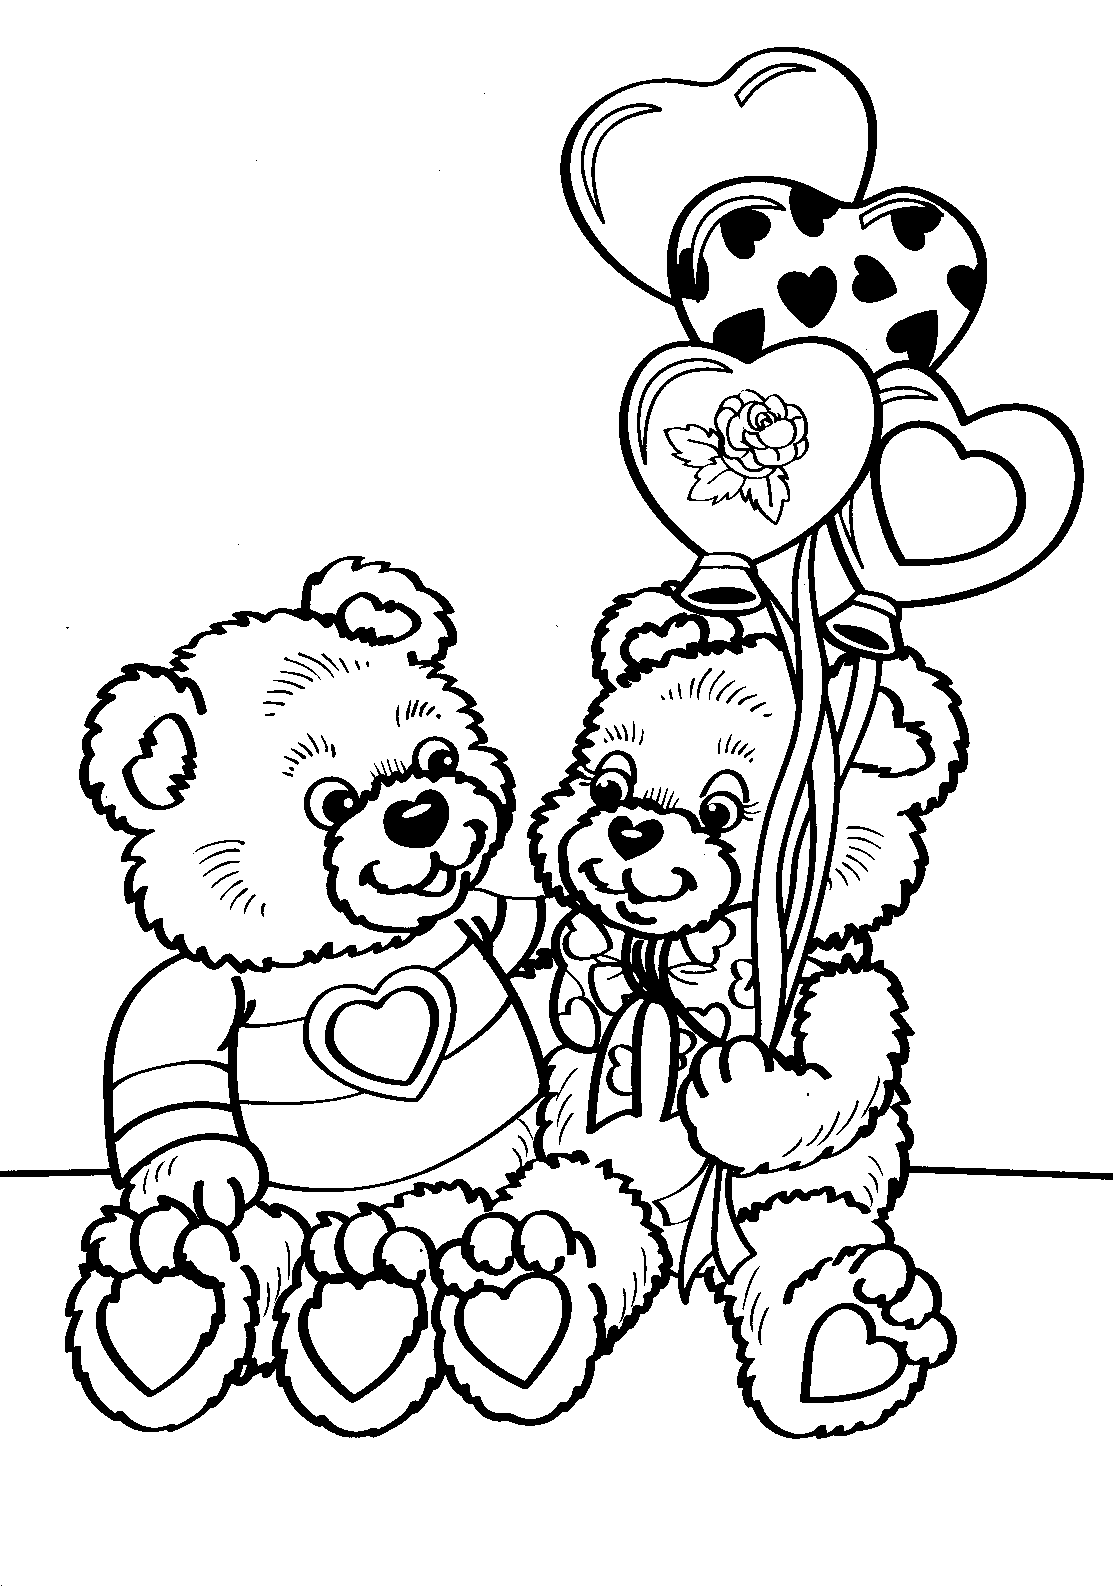 Download Valentine's Day Coloring Pages - Minnesota Miranda